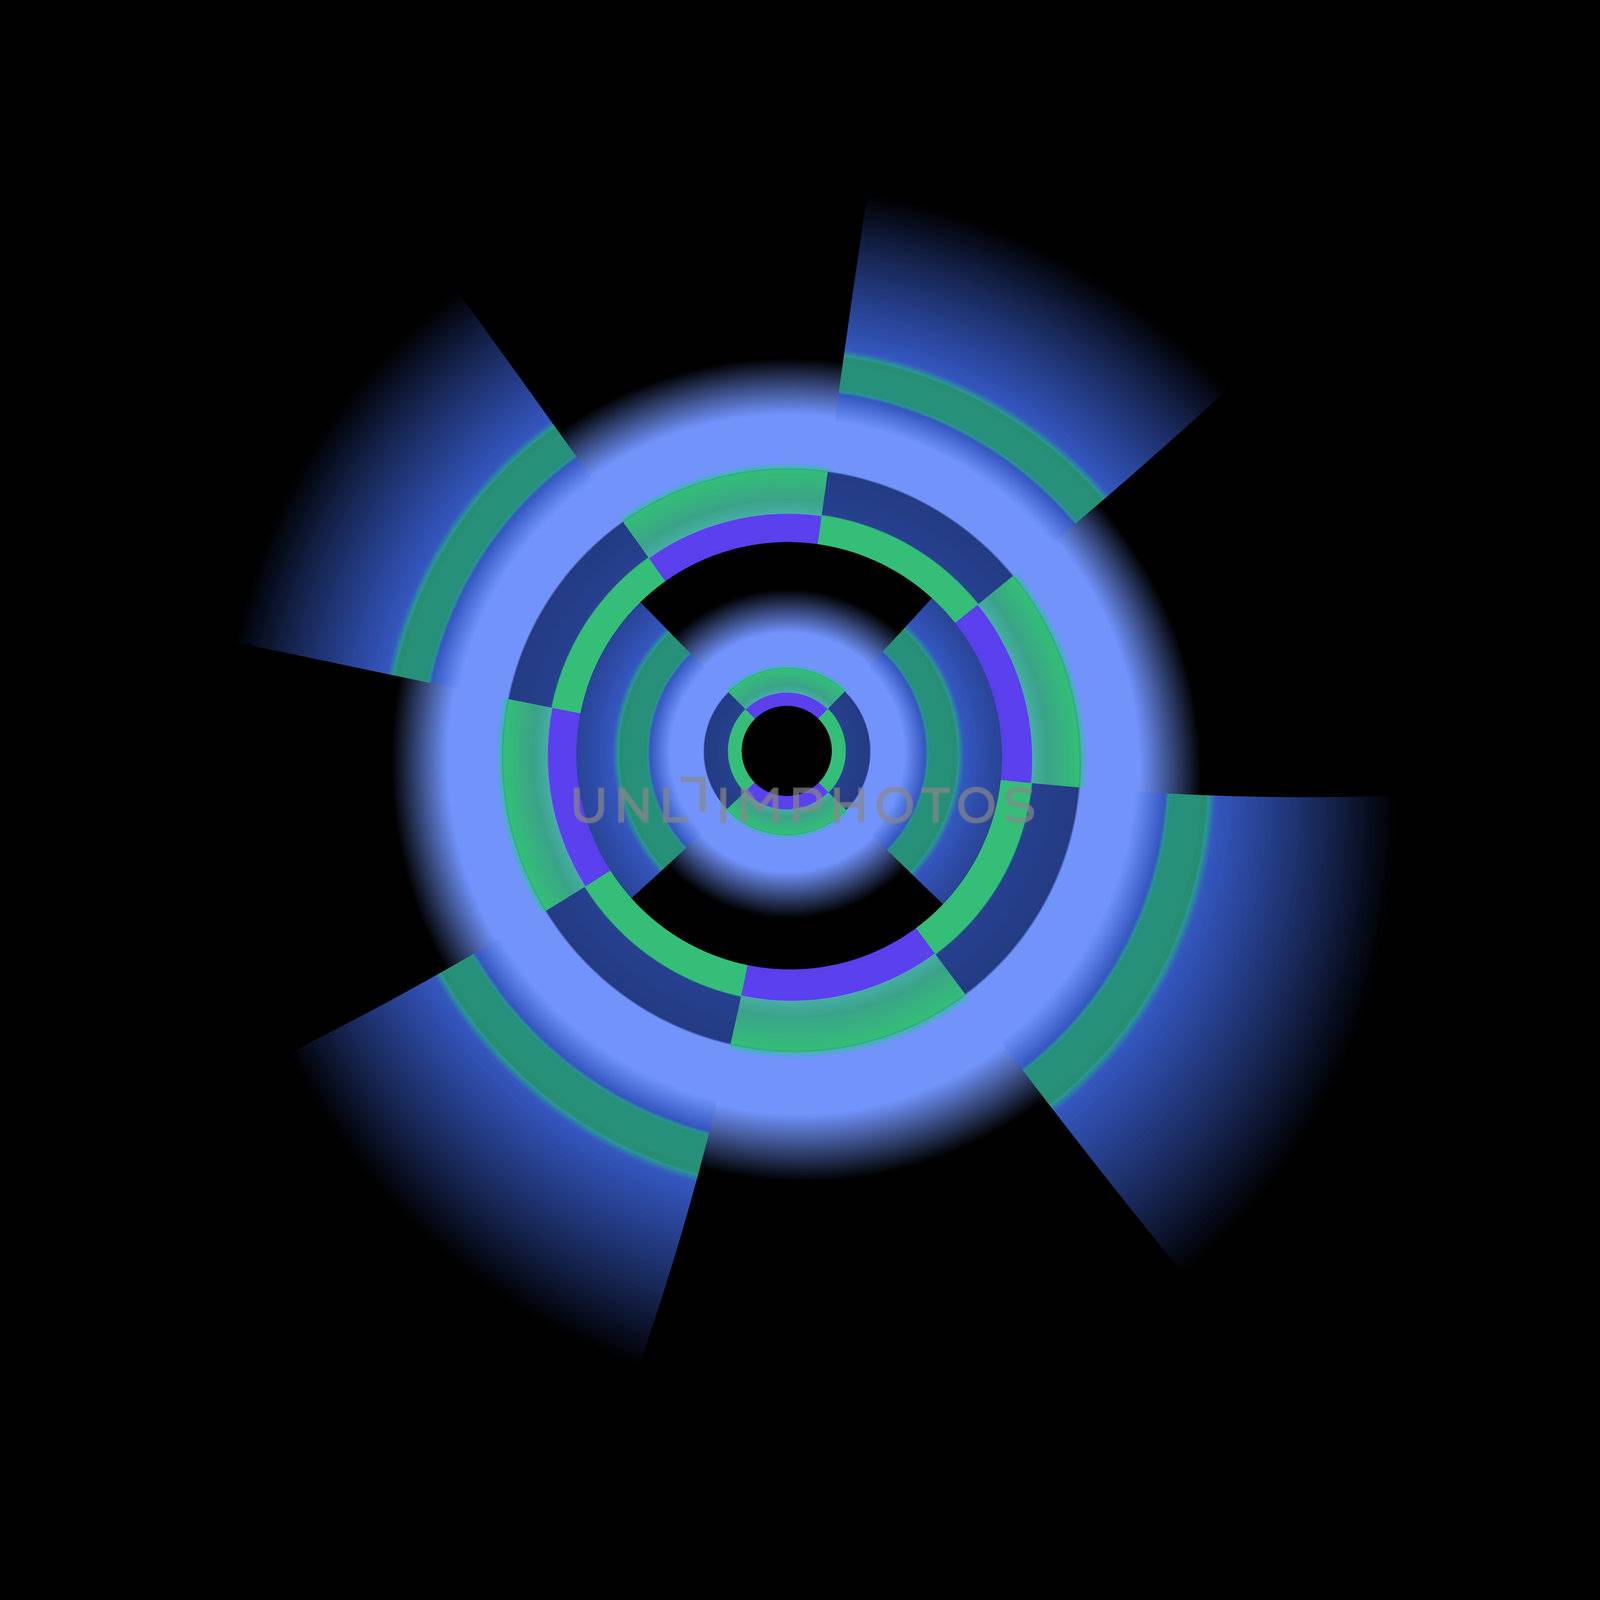 An abstract fractal done in shades of blue and green and designed to look like the center of a fan.